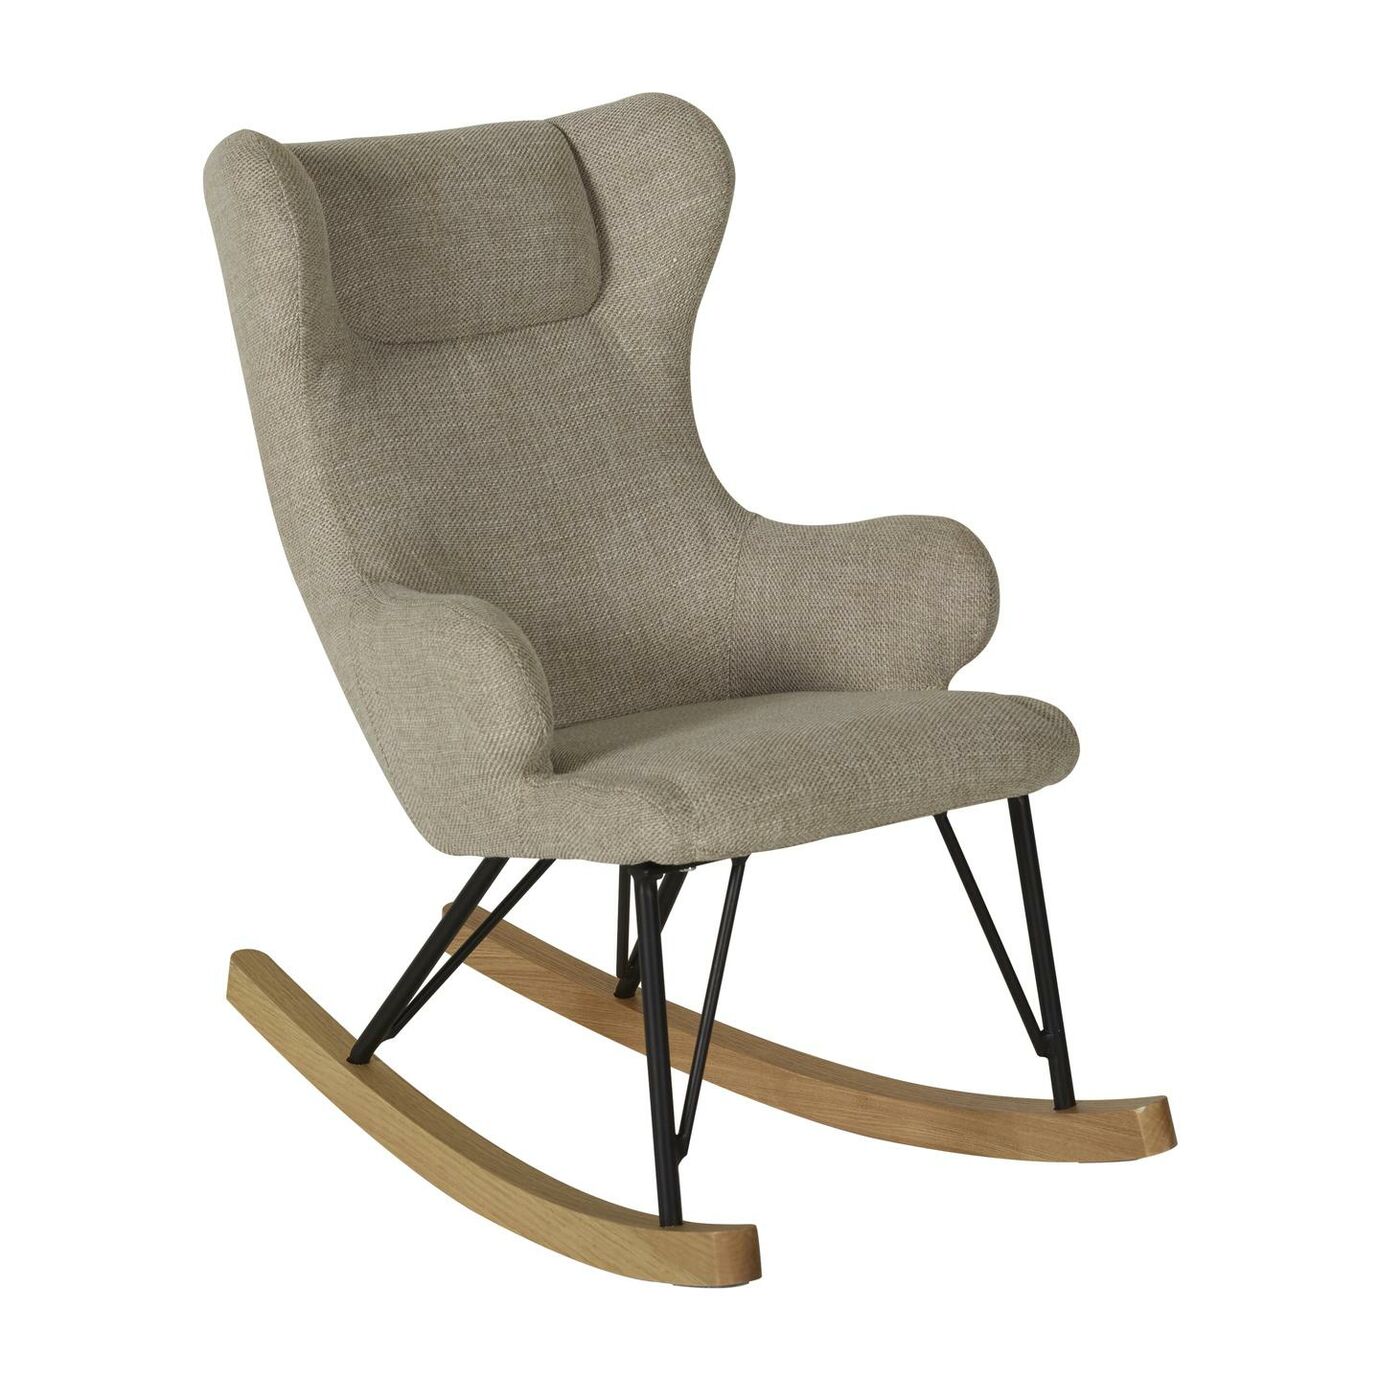 Quax rocking chair de luxe clay - The Little